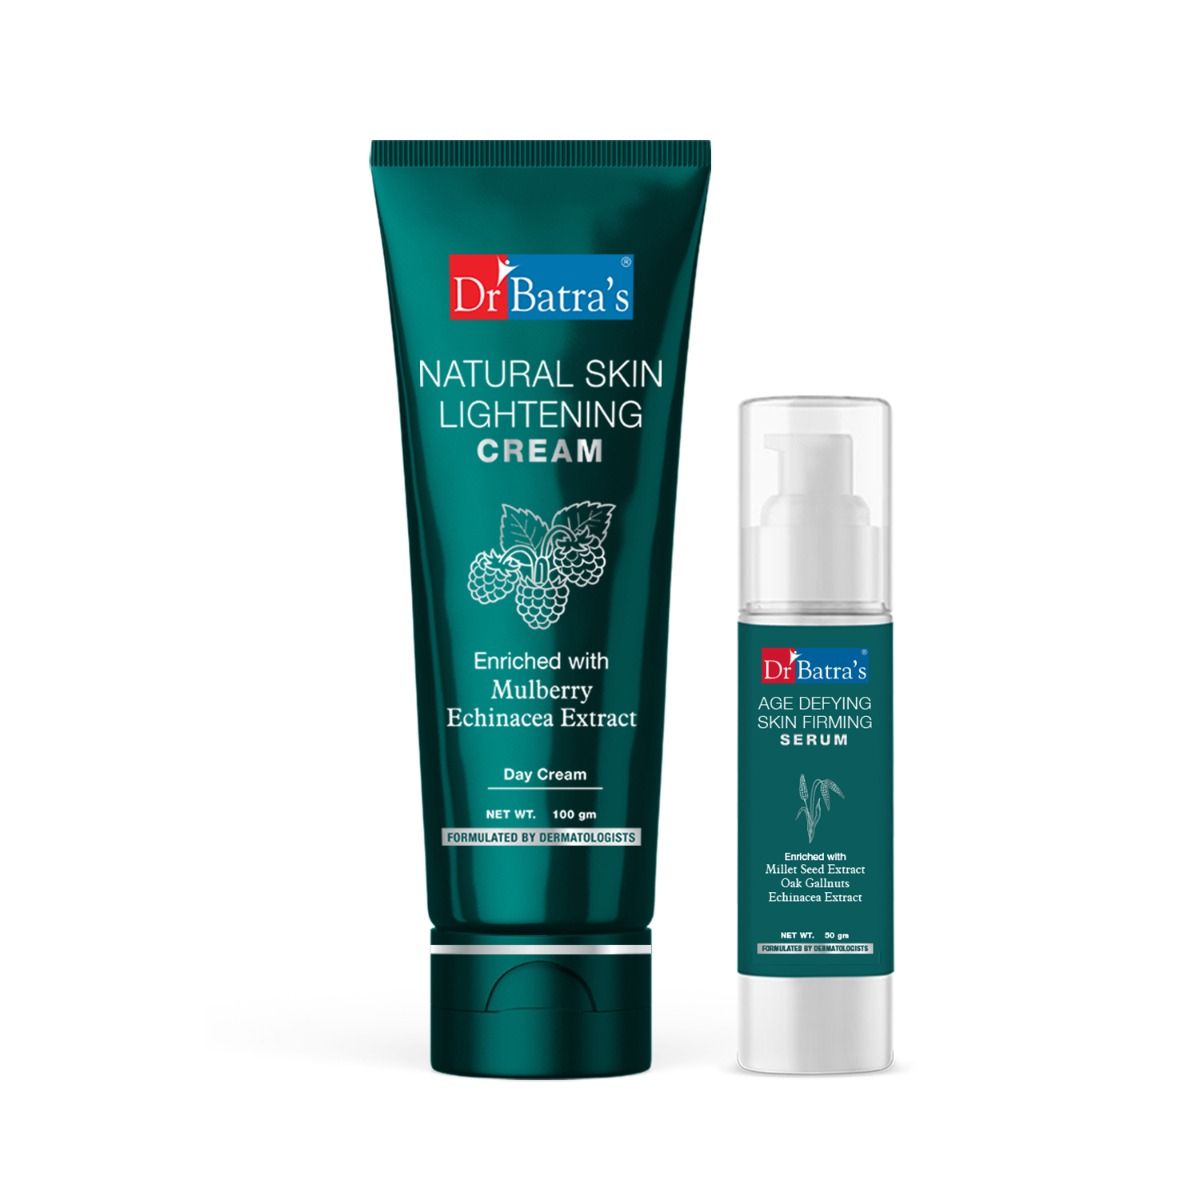     			Dr Batra's Age defying Skin firming Serum - 50 g and Natural Skin Lightening Cream - 100 gm (Pack of 2 For Men and Women)